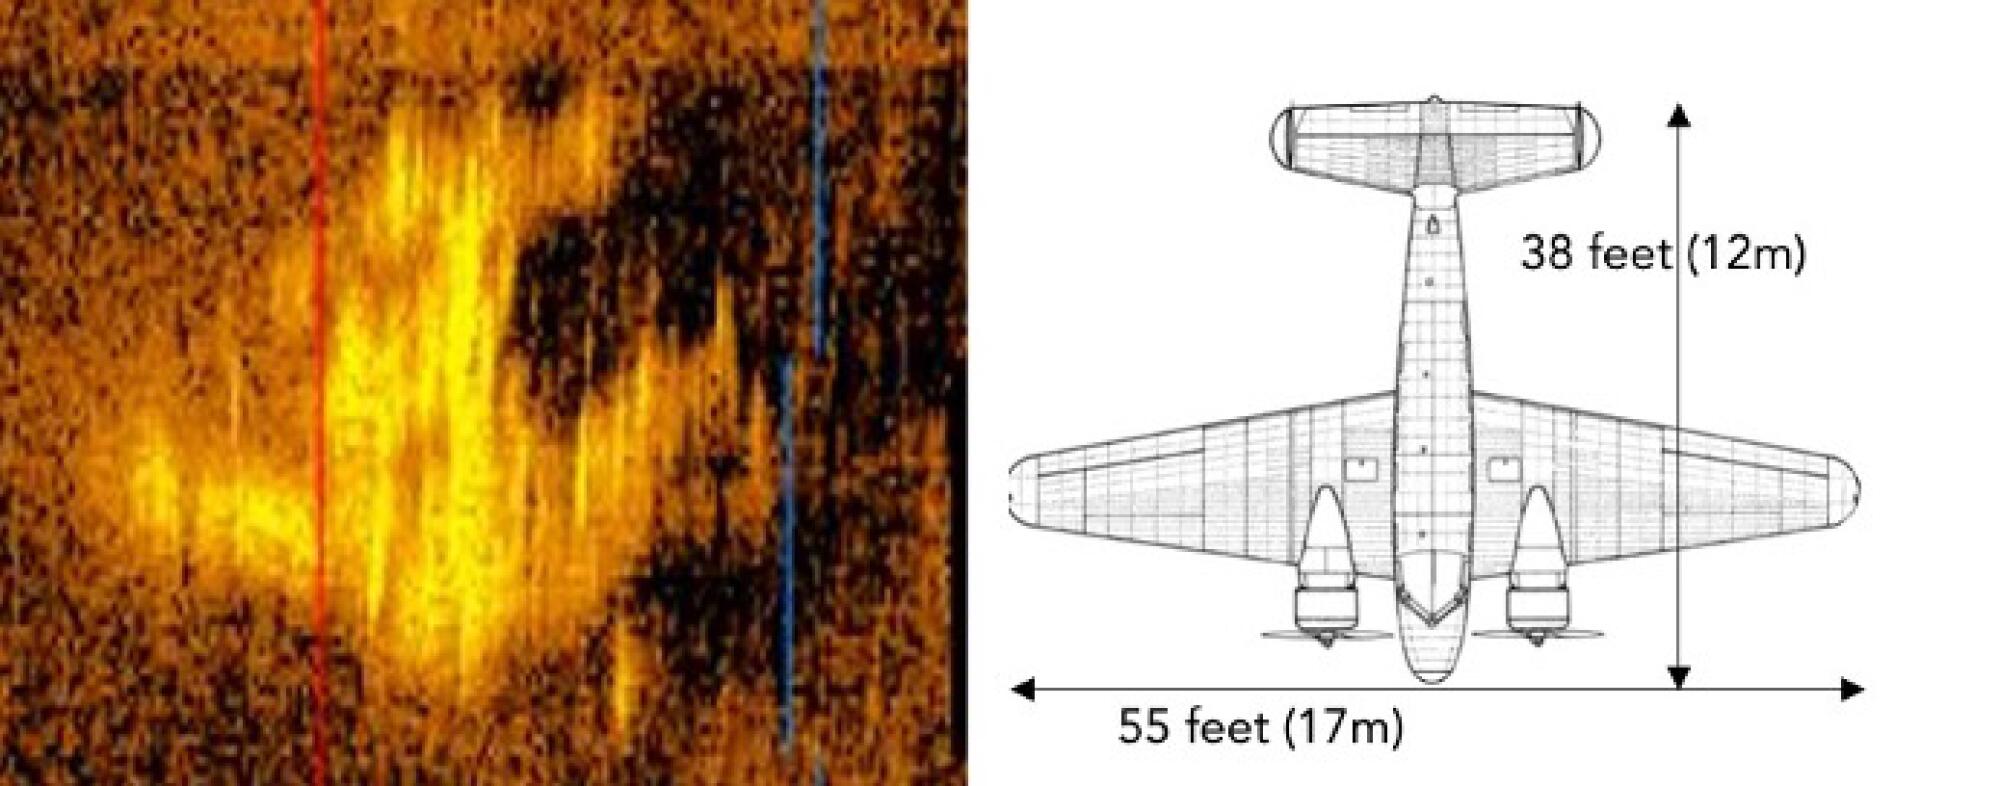 A image of what might be Emilia Earhart's plane. 